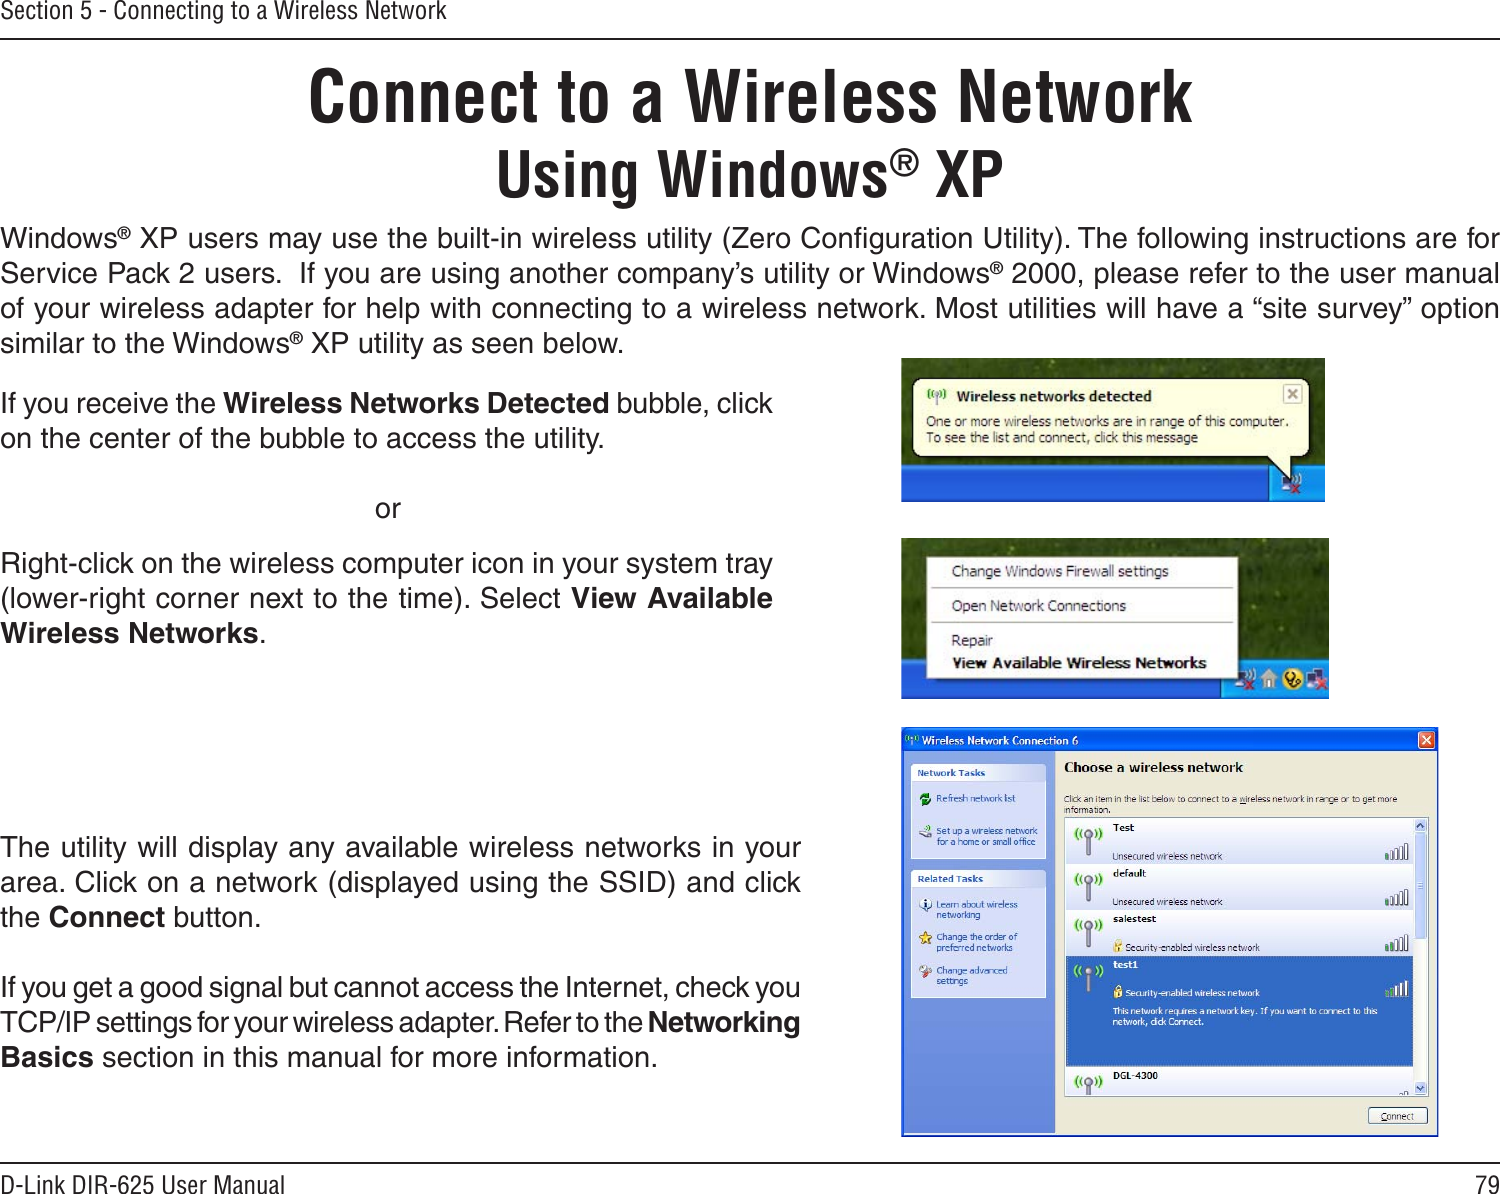 79D-Link DIR-625 User ManualSection 5 - Connecting to a Wireless NetworkConnect to a Wireless NetworkUsing Windows® XPWindows® XP users may use the built-in wireless utility (Zero Conﬁguration Utility). The following instructions are for Service Pack 2 users.  If you are using another company’s utility or Windows® 2000, please refer to the user manual of your wireless adapter for help with connecting to a wireless network. Most utilities will have a “site survey” option similar to the Windows® XP utility as seen below.Right-click on the wireless computer icon in your system tray (lower-right corner next to the time). Select View Available Wireless Networks.If you receive the Wireless Networks Detected bubble, click on the center of the bubble to access the utility.     orThe utility will display any available wireless networks in your area. Click on a network (displayed using the SSID) and click the Connect button.If you get a good signal but cannot access the Internet, check you TCP/IP settings for your wireless adapter. Refer to the Networking Basics section in this manual for more information.